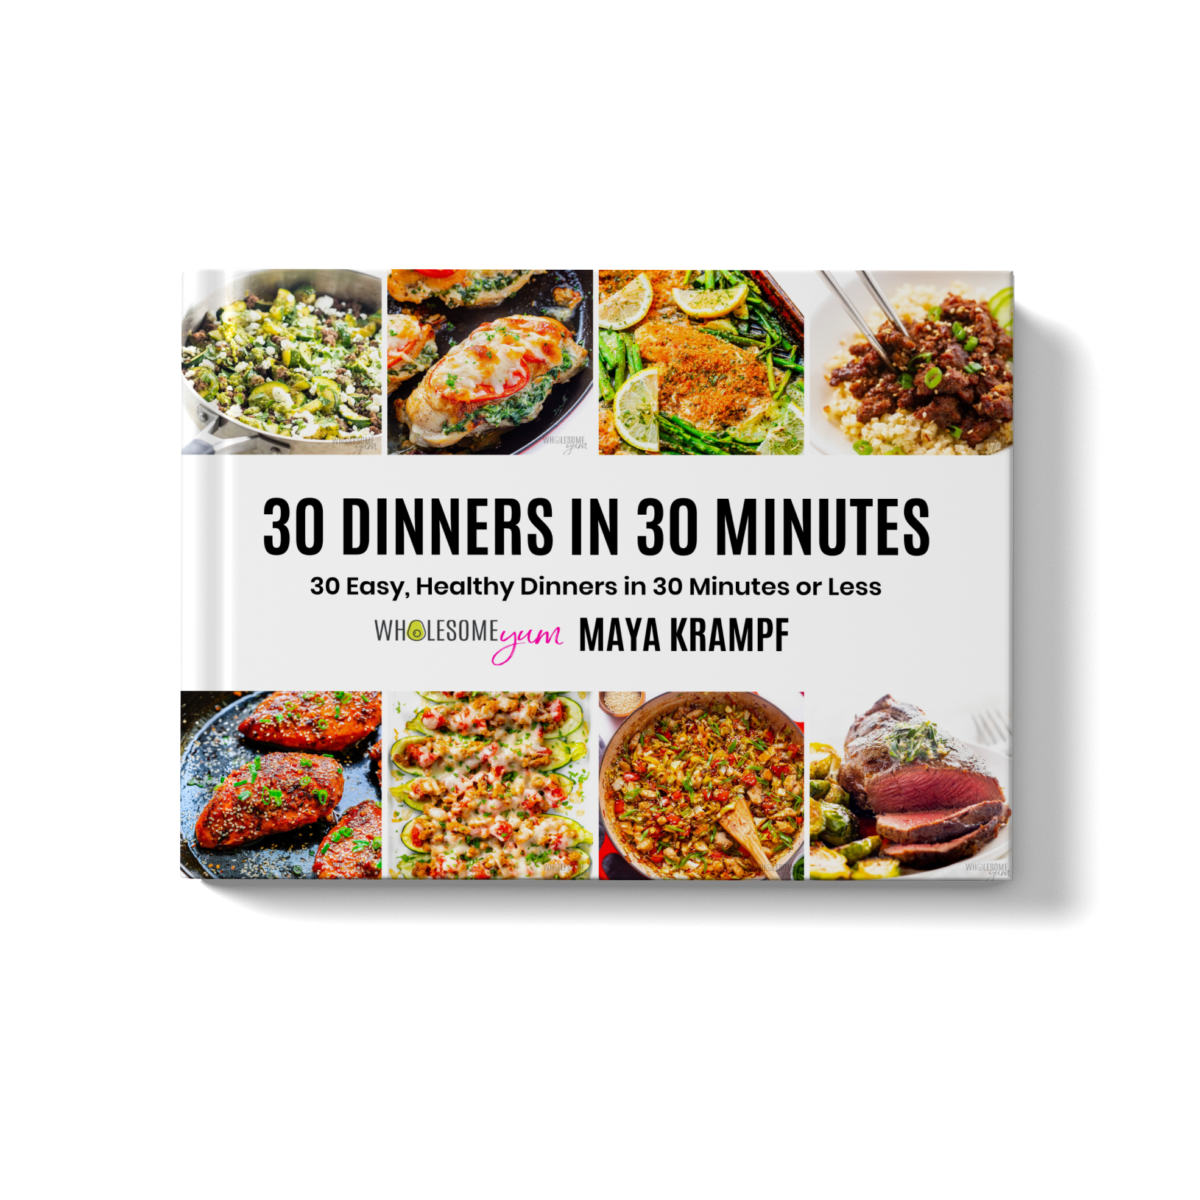 30 Dinners In 30 Minutes Ebook.